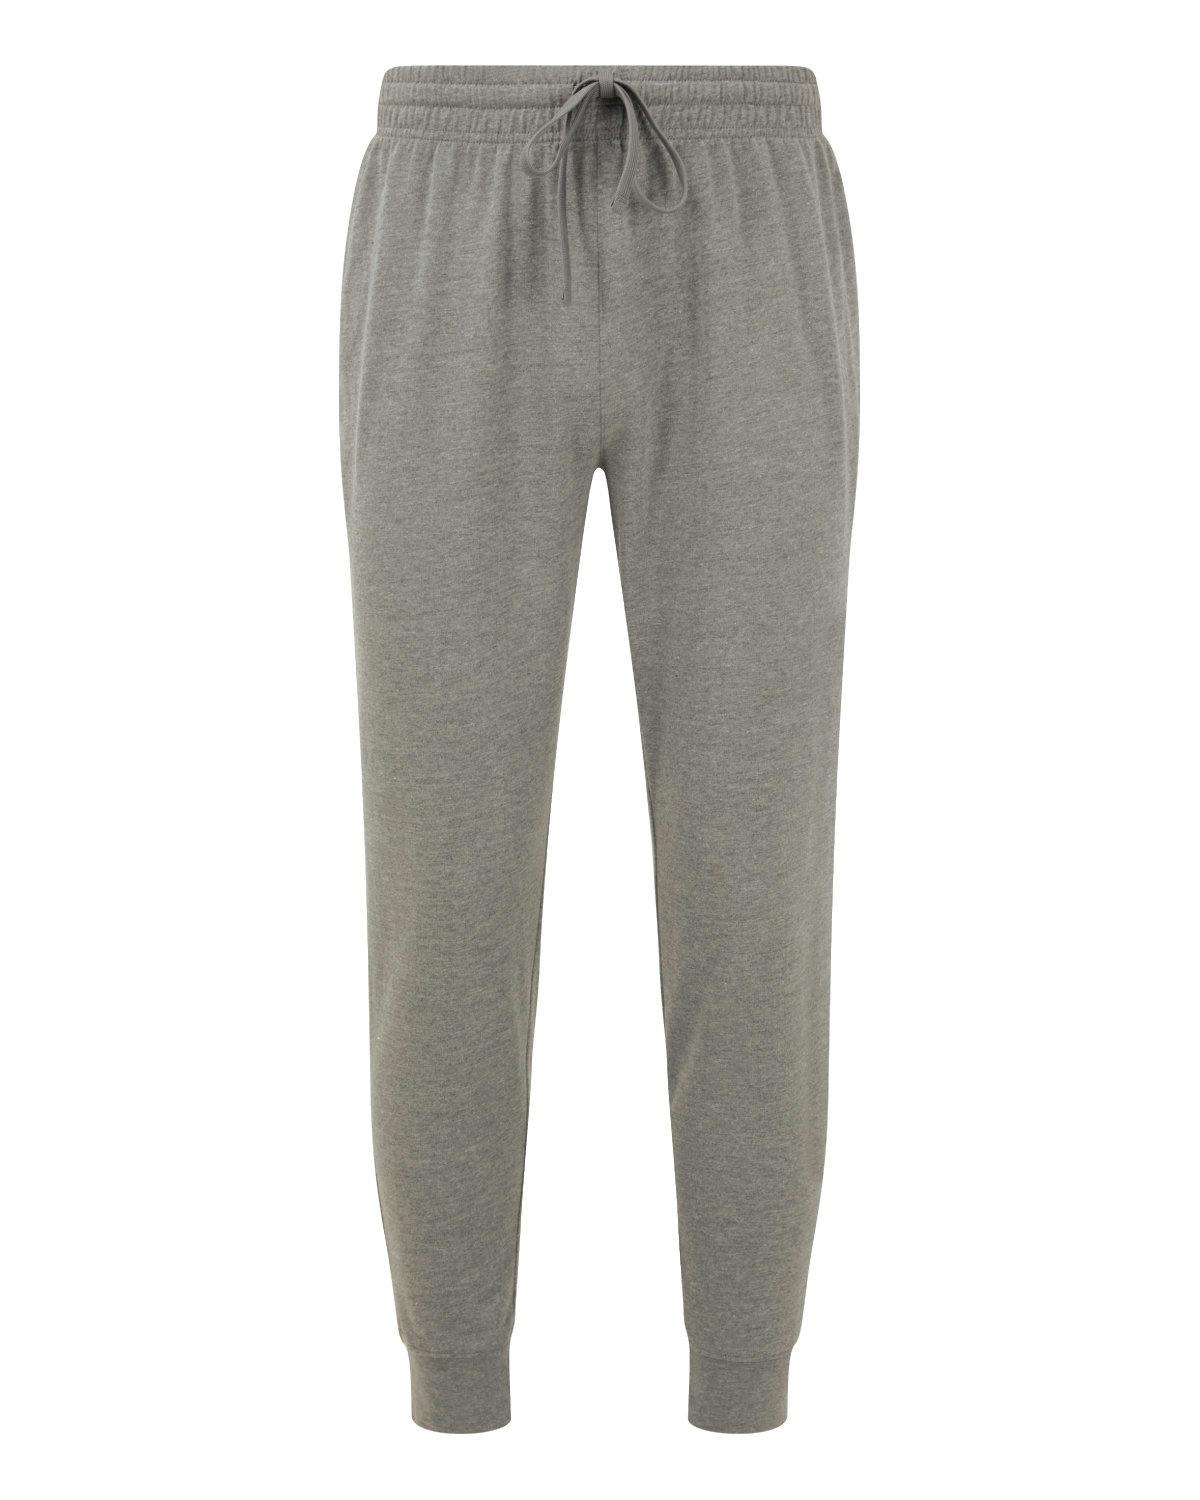 Image for Unisex Light Terry Jogger